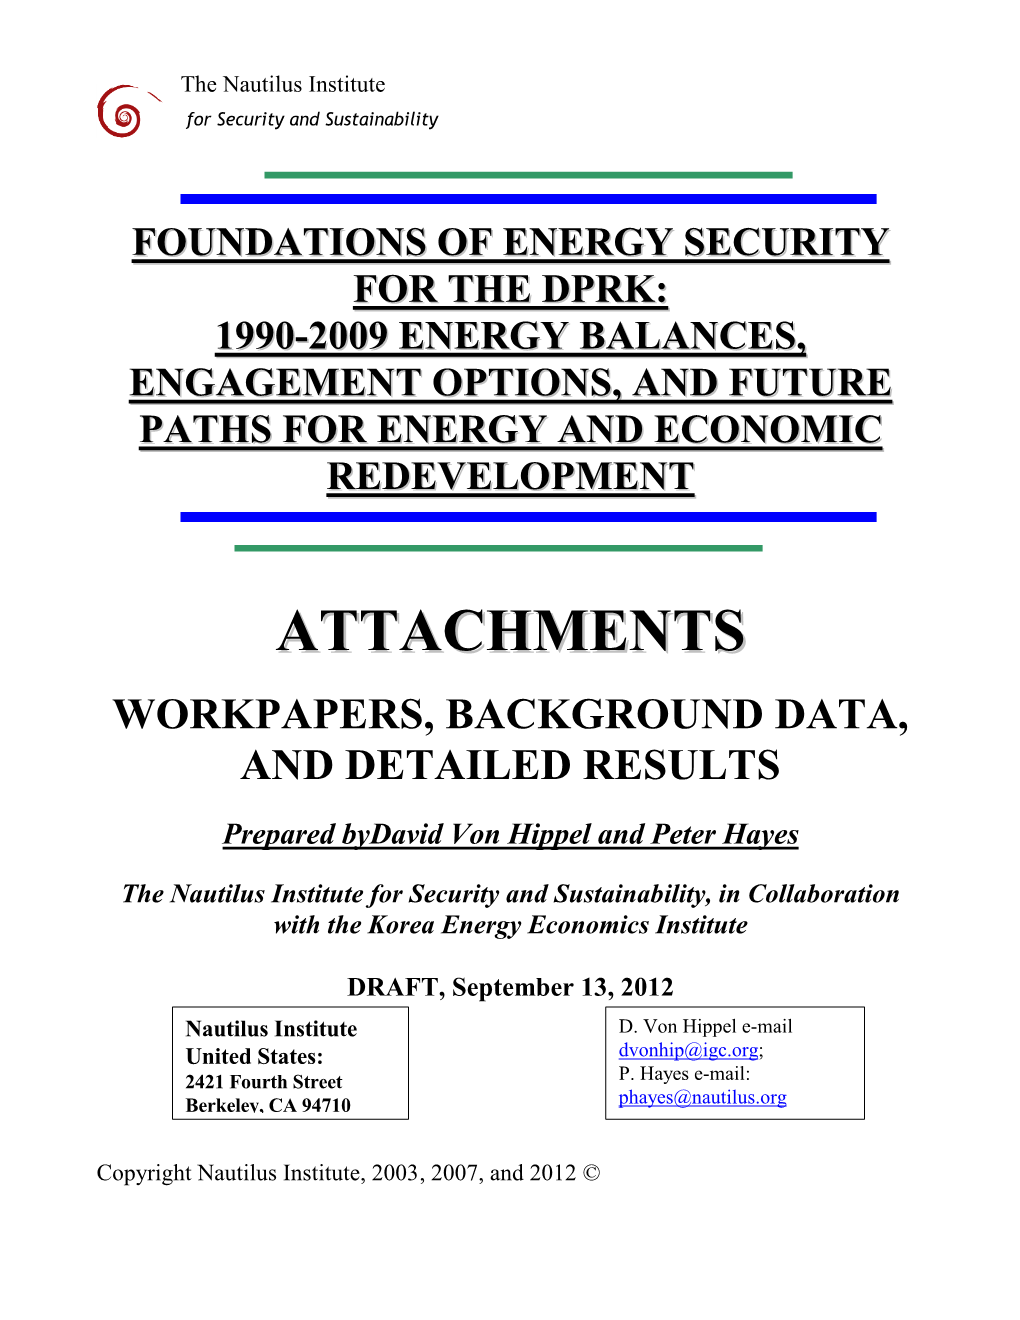 Dprk: 1990-2009 Energy Balances, Engagement Options, and Future Paths for Energy and Economic Redevelopment